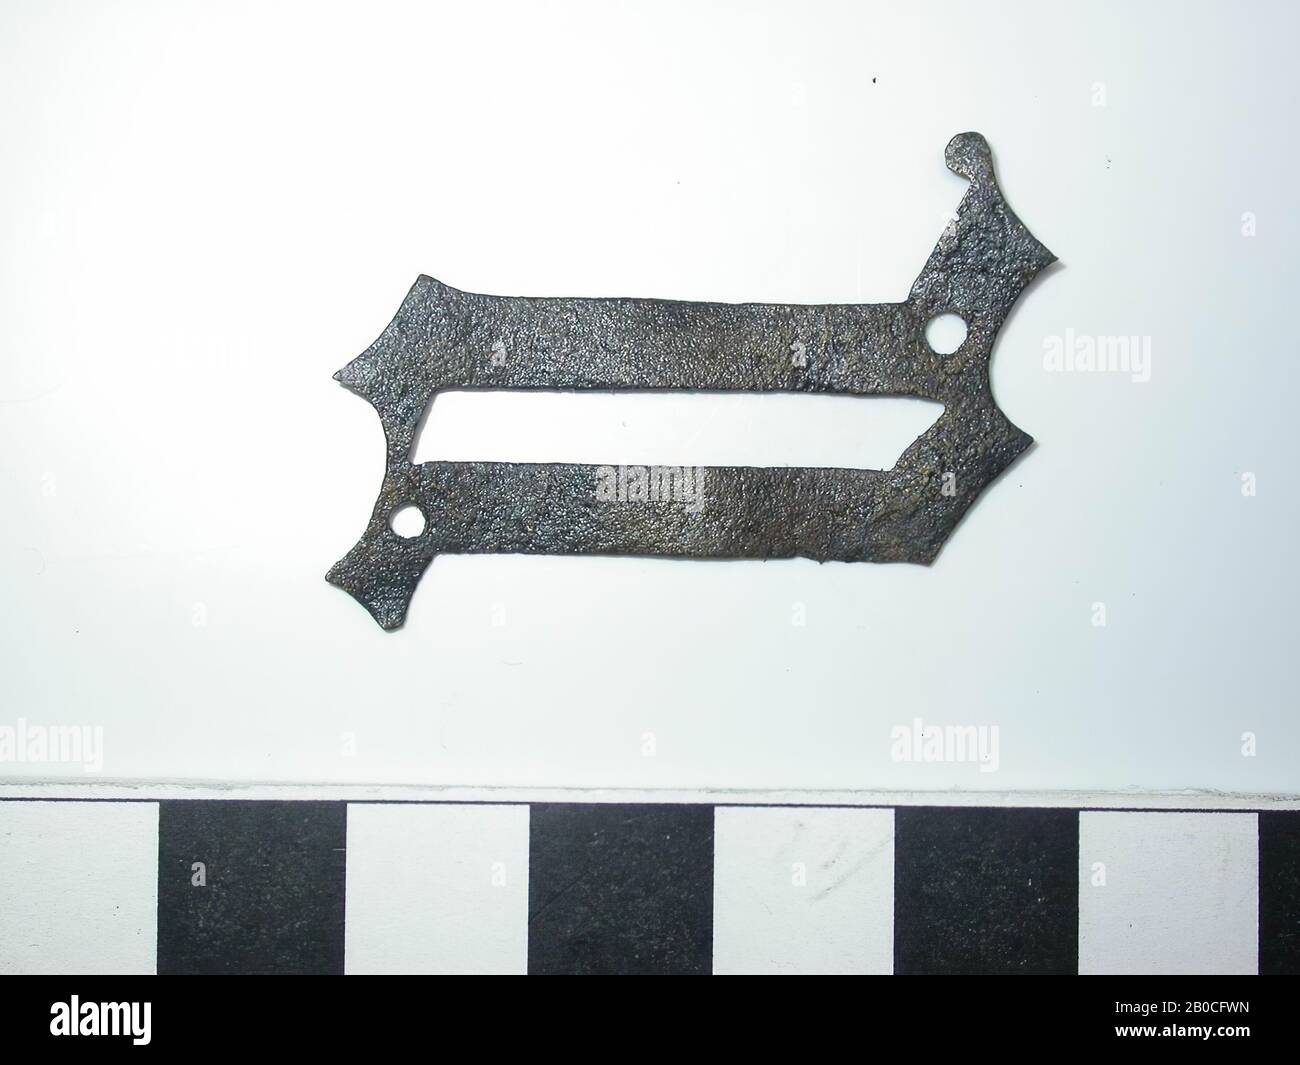 Letter Q, dark with gold-colored spots (copper alloy). Letter Q with 2 small round holes for the pin. Back is flat. No attachment is visible., Belt fitting, metal, copper alloy, H: 4.1 cm, W: 2.8 cm, D: 0.1 cm, end of the 14th century 1350-1400, The Netherlands, Zeeland, Hulst, Verdronken Land Stock Photo